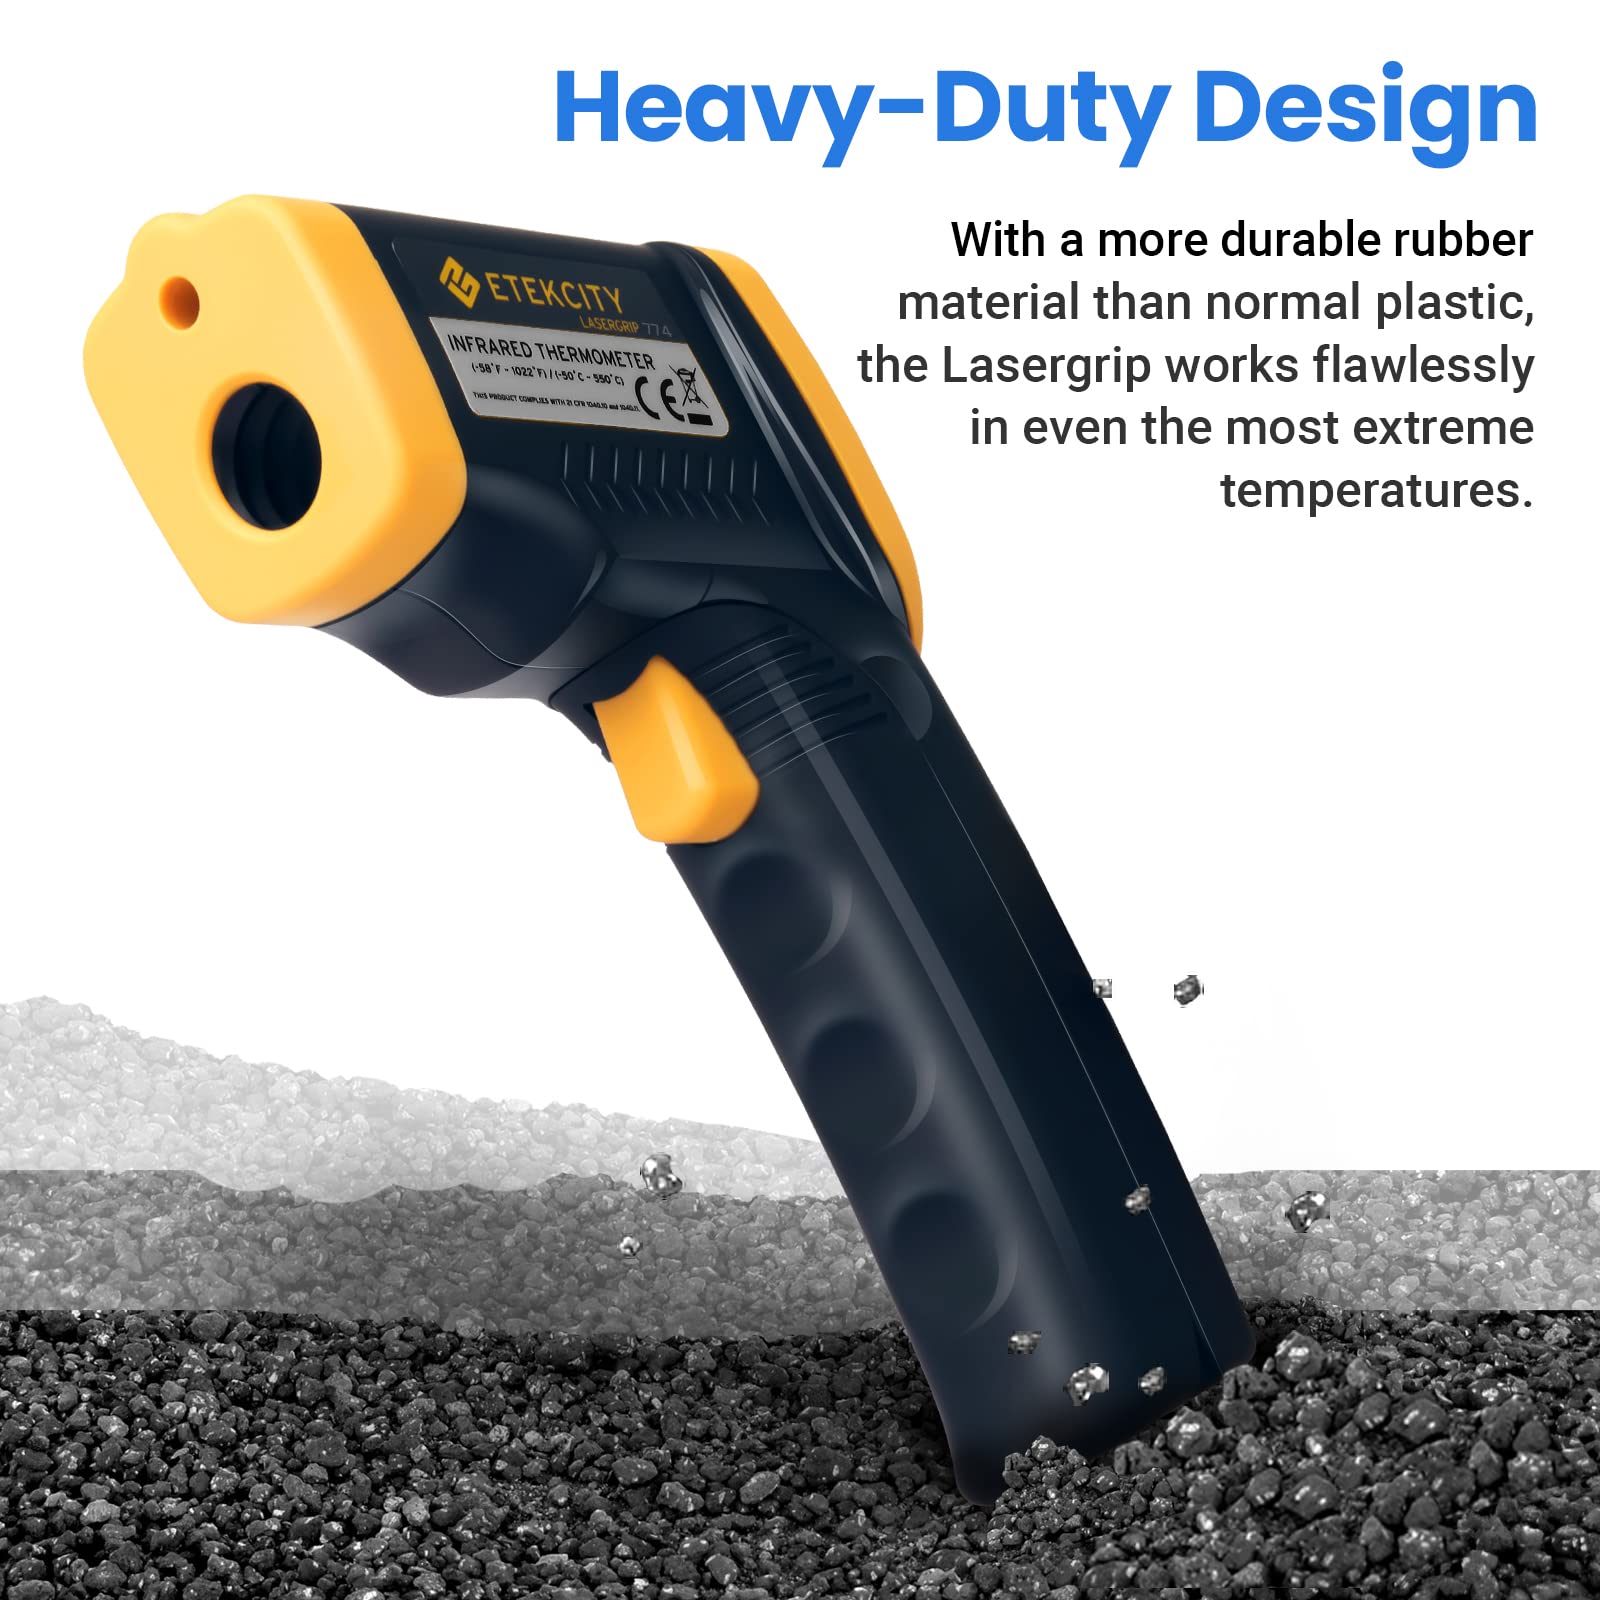 Etekcity Infrared Thermometer 774, Digital Temperature Gun for Cooking, Non Contact Electric Laser IR Temp Gauge, Home Repairs, Handmaking, Surface Measuring, -58 to 716 ℉, - 50 to 380 ℃, Yellow